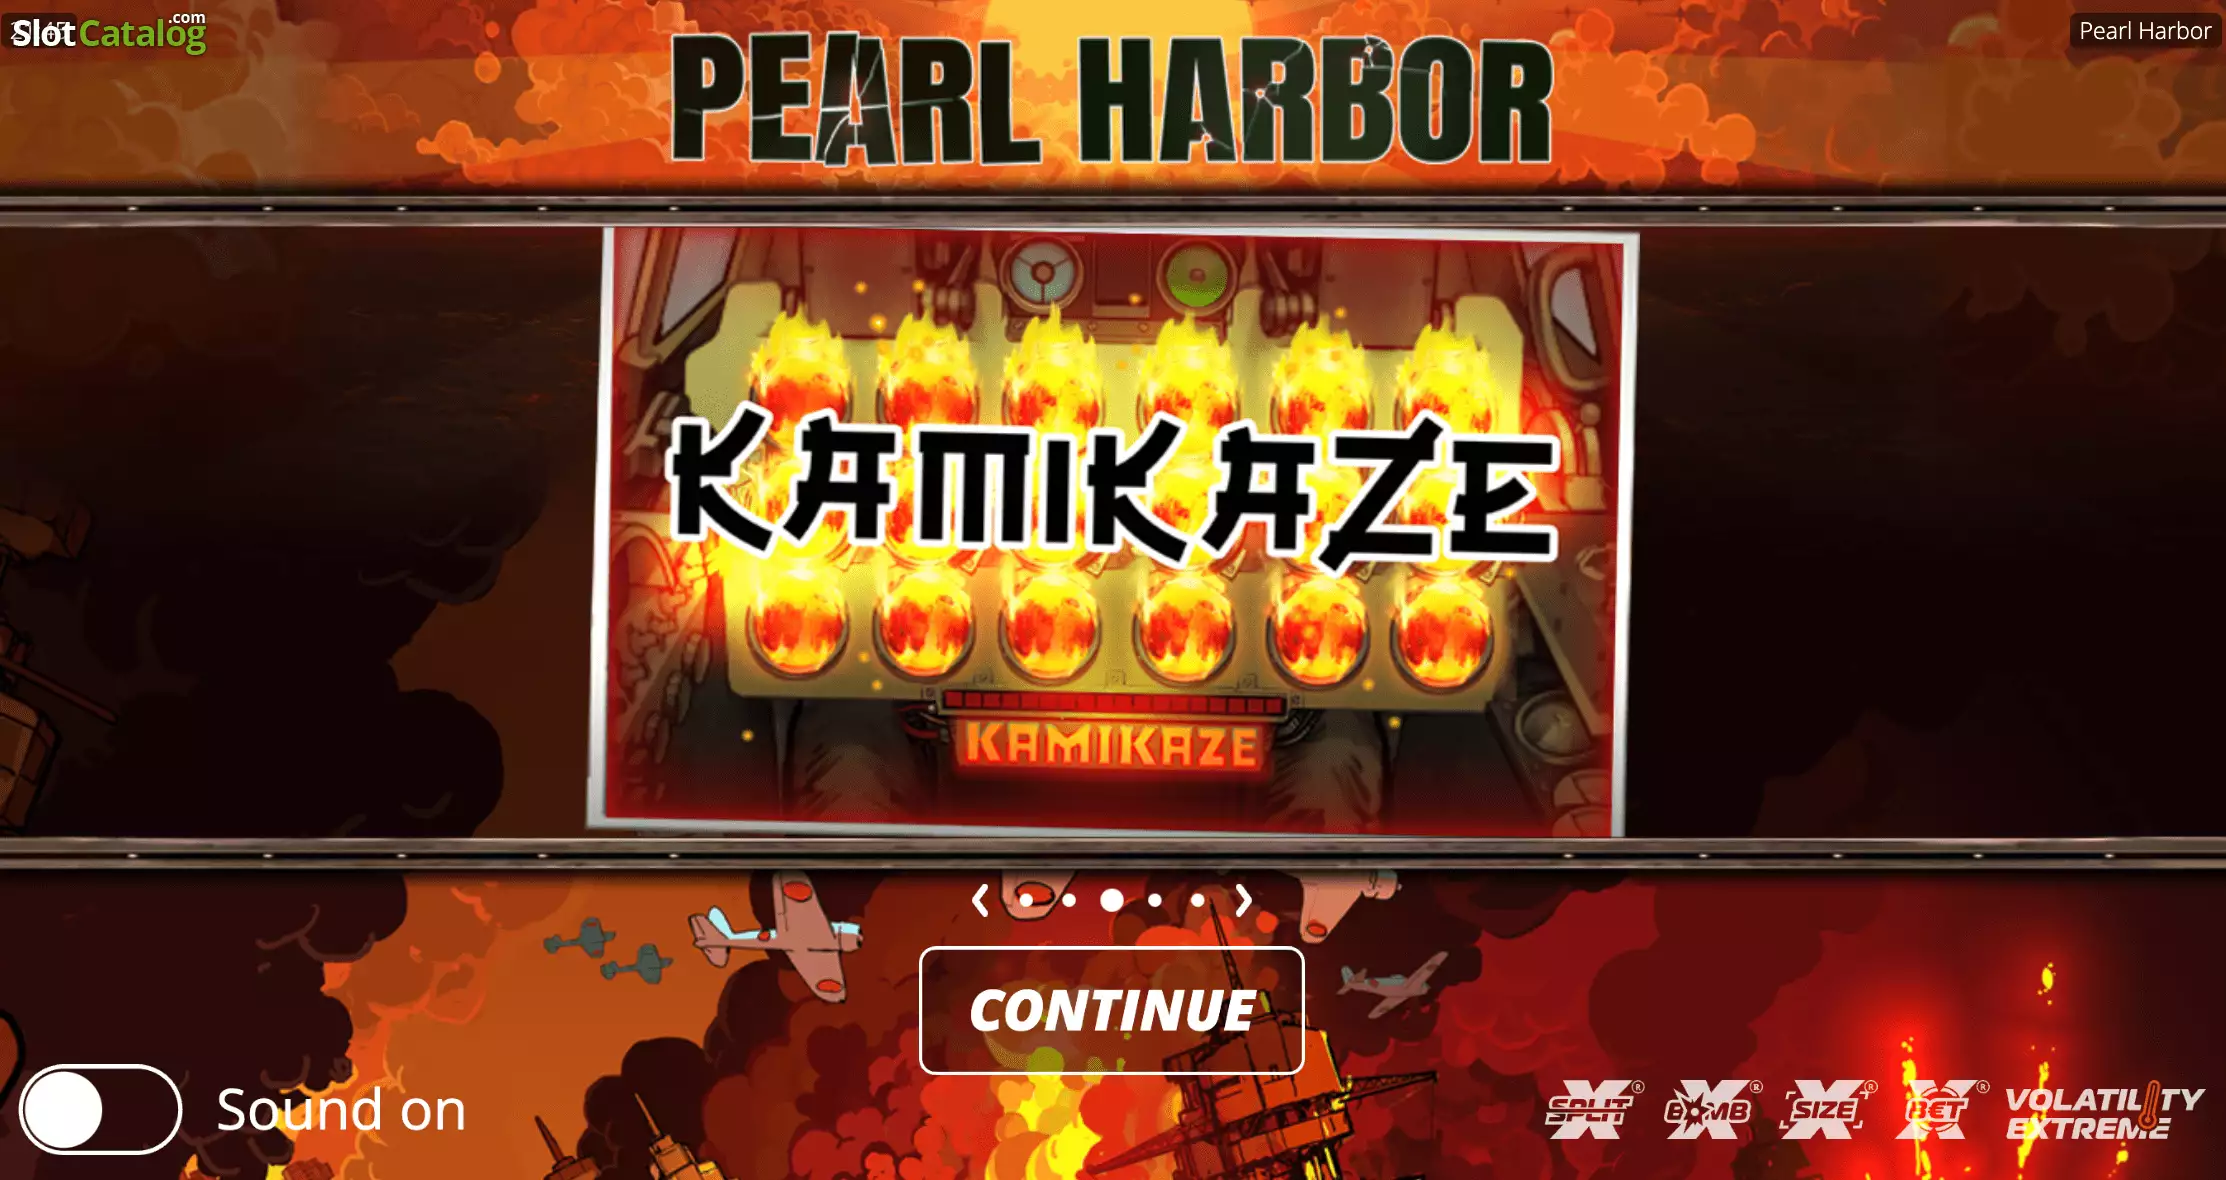 Play Pearl Harbor Demo Slot and Check Our Game Review